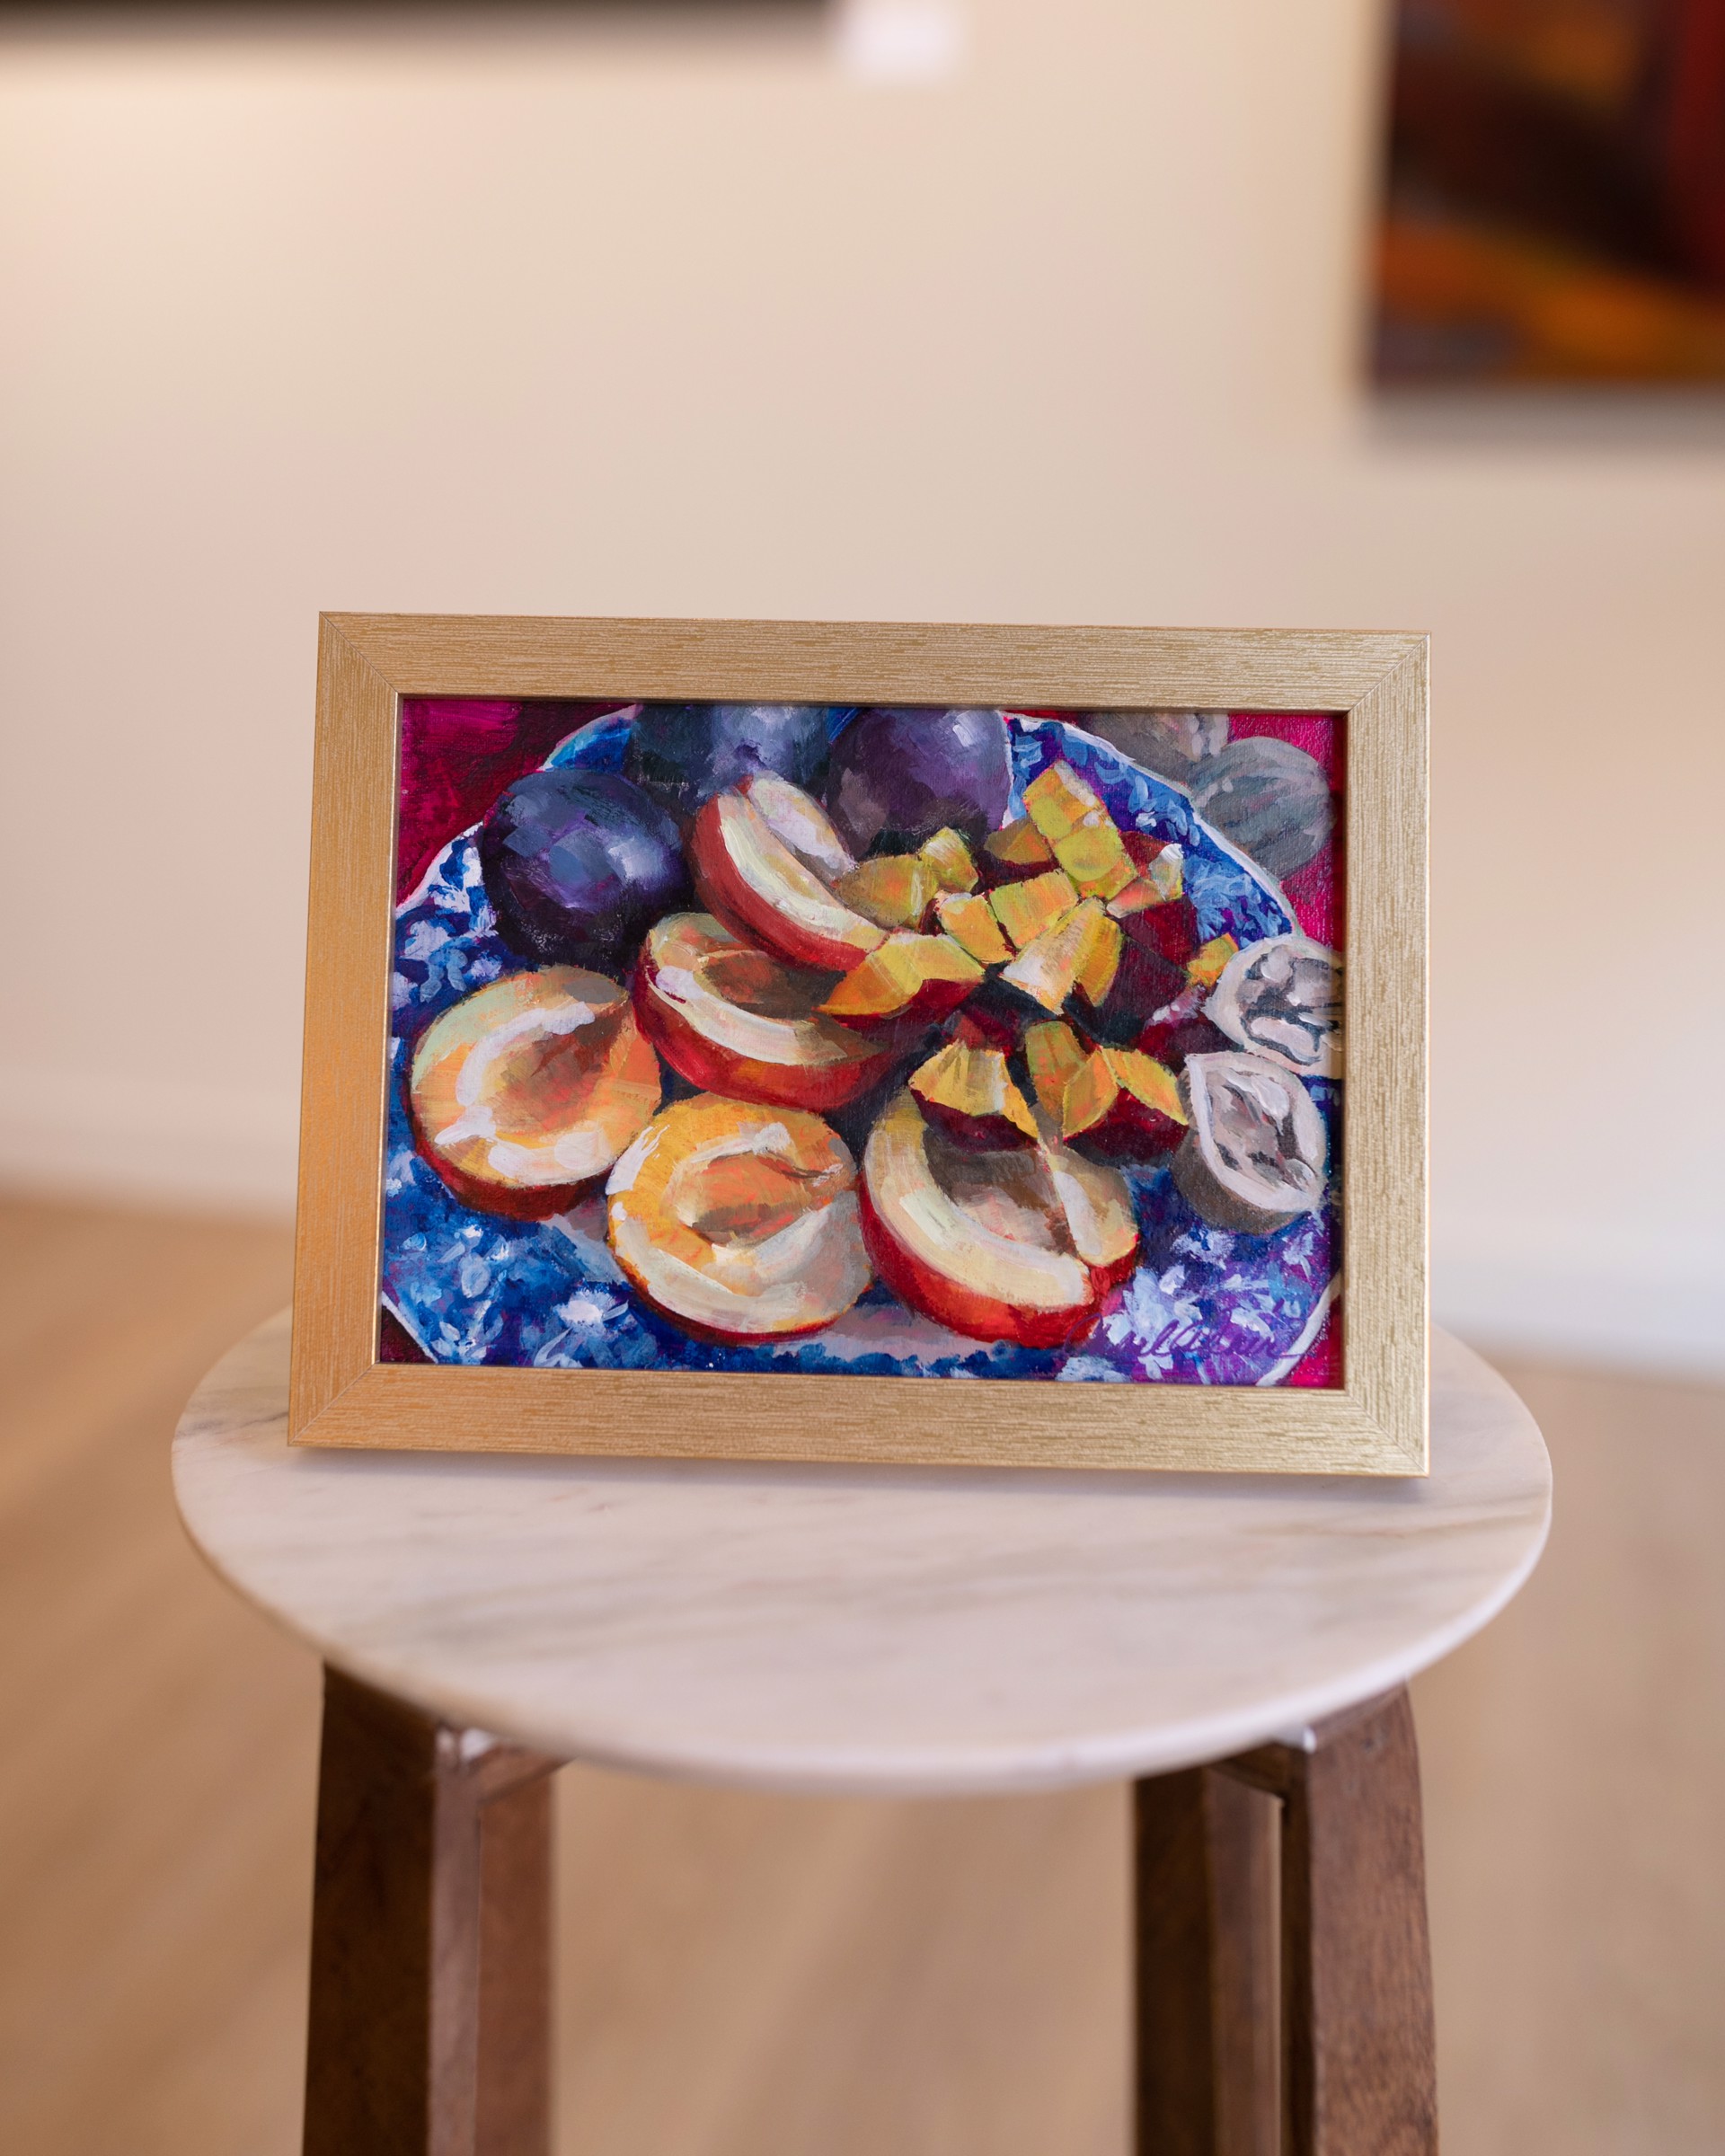 Figs and Nectarines - 65 by Charl Adair